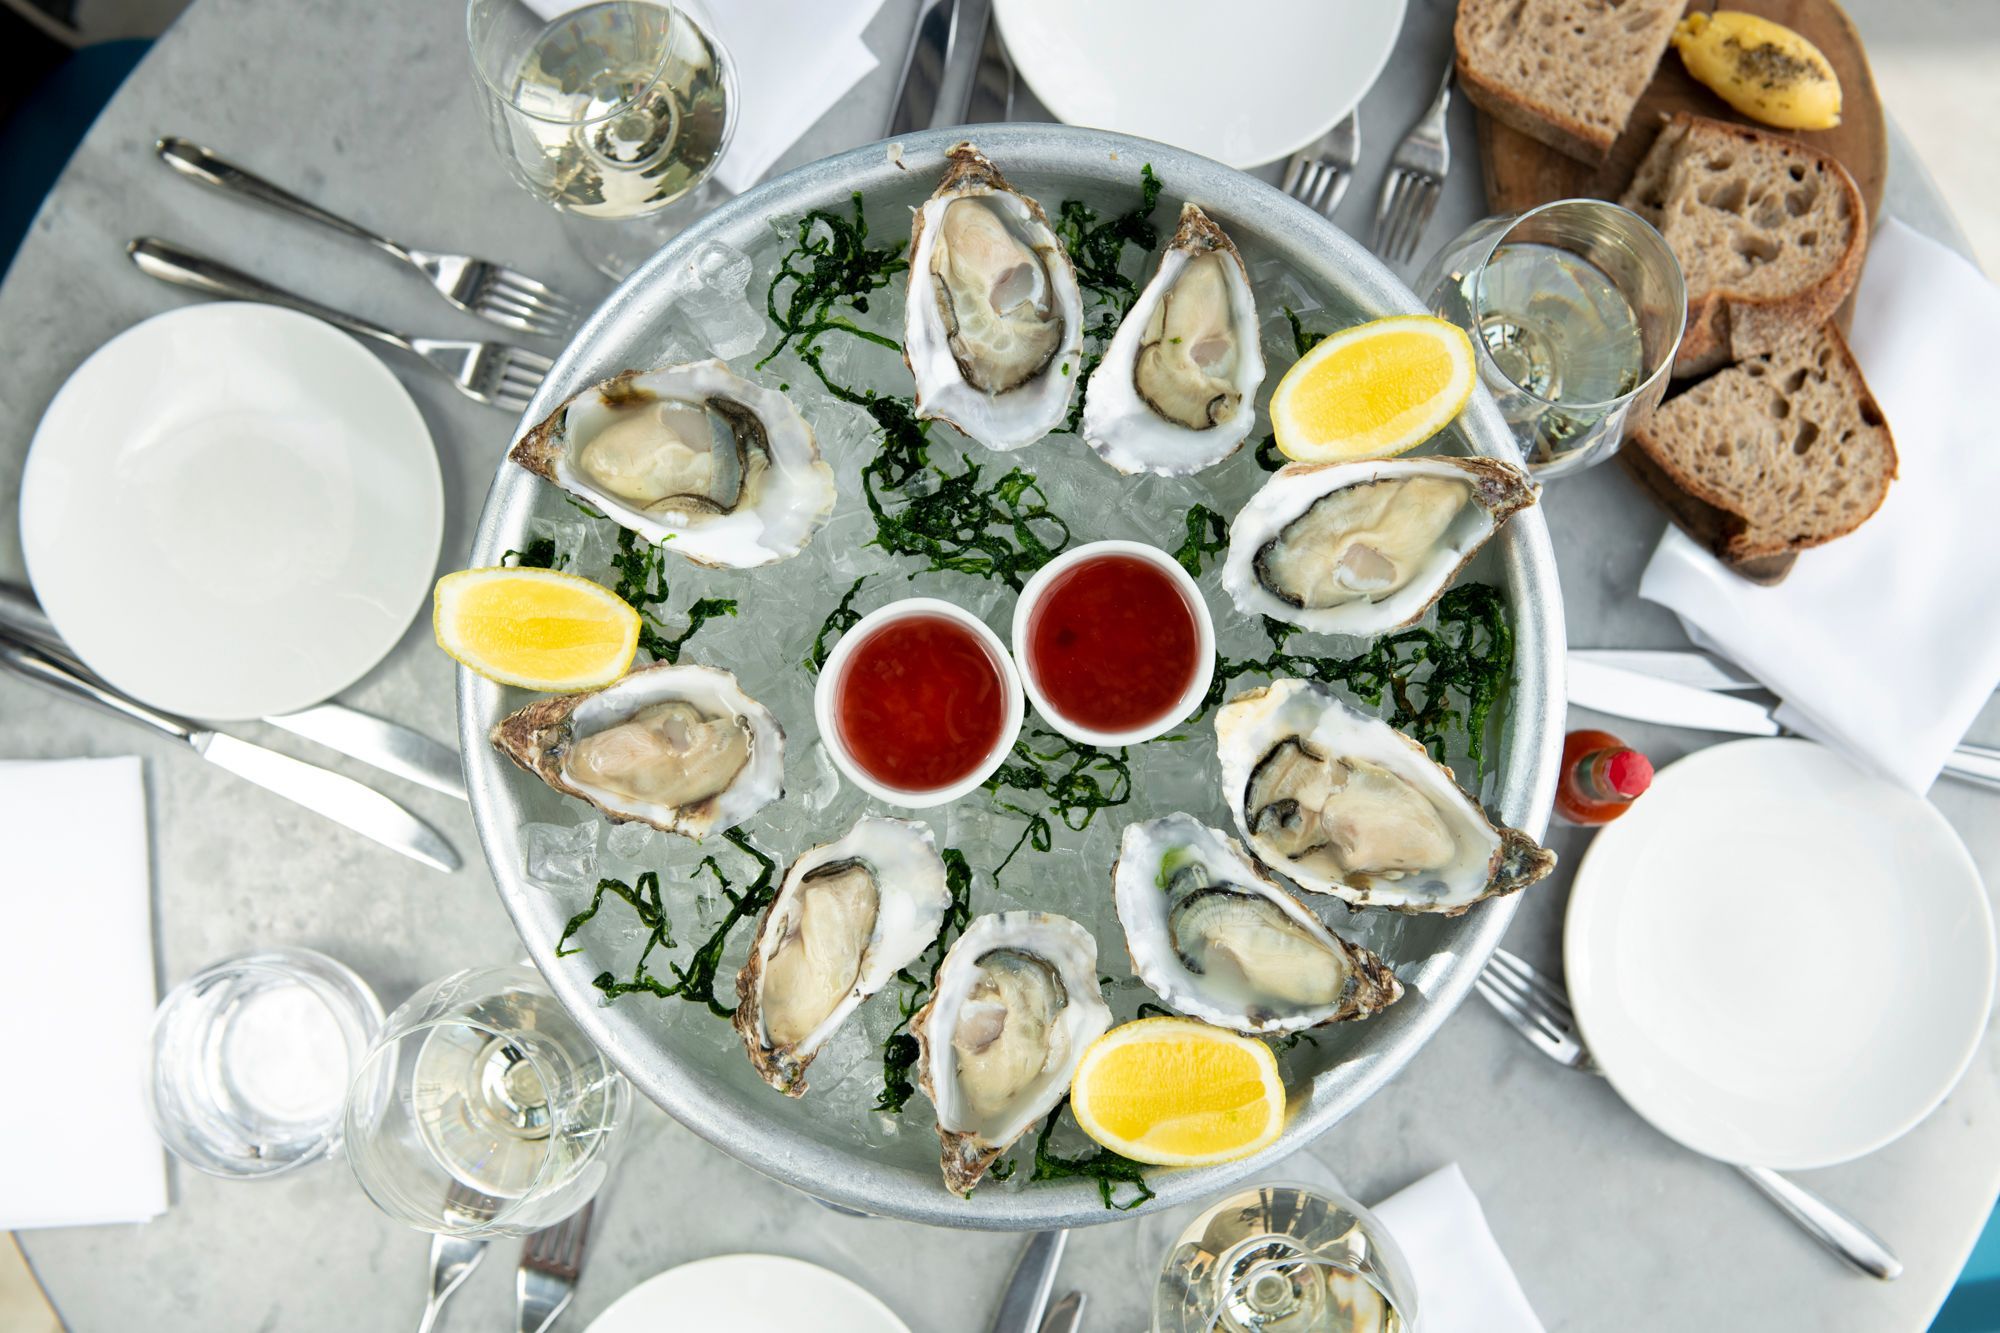 plate with oysters and lemons served with bread and white wine